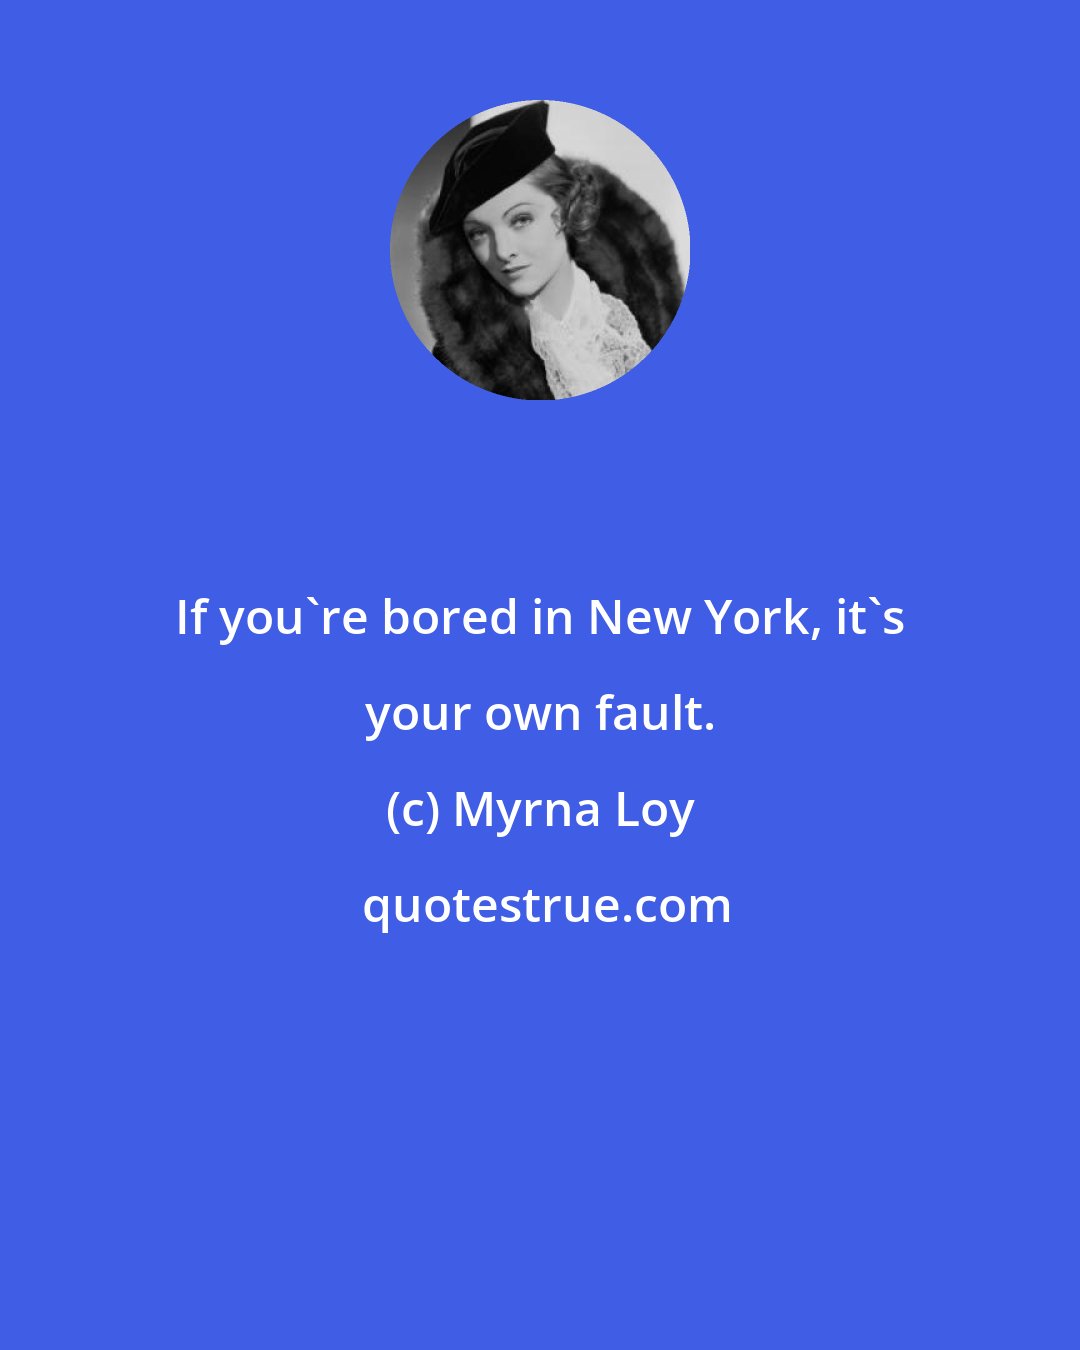 Myrna Loy: If you're bored in New York, it's your own fault.